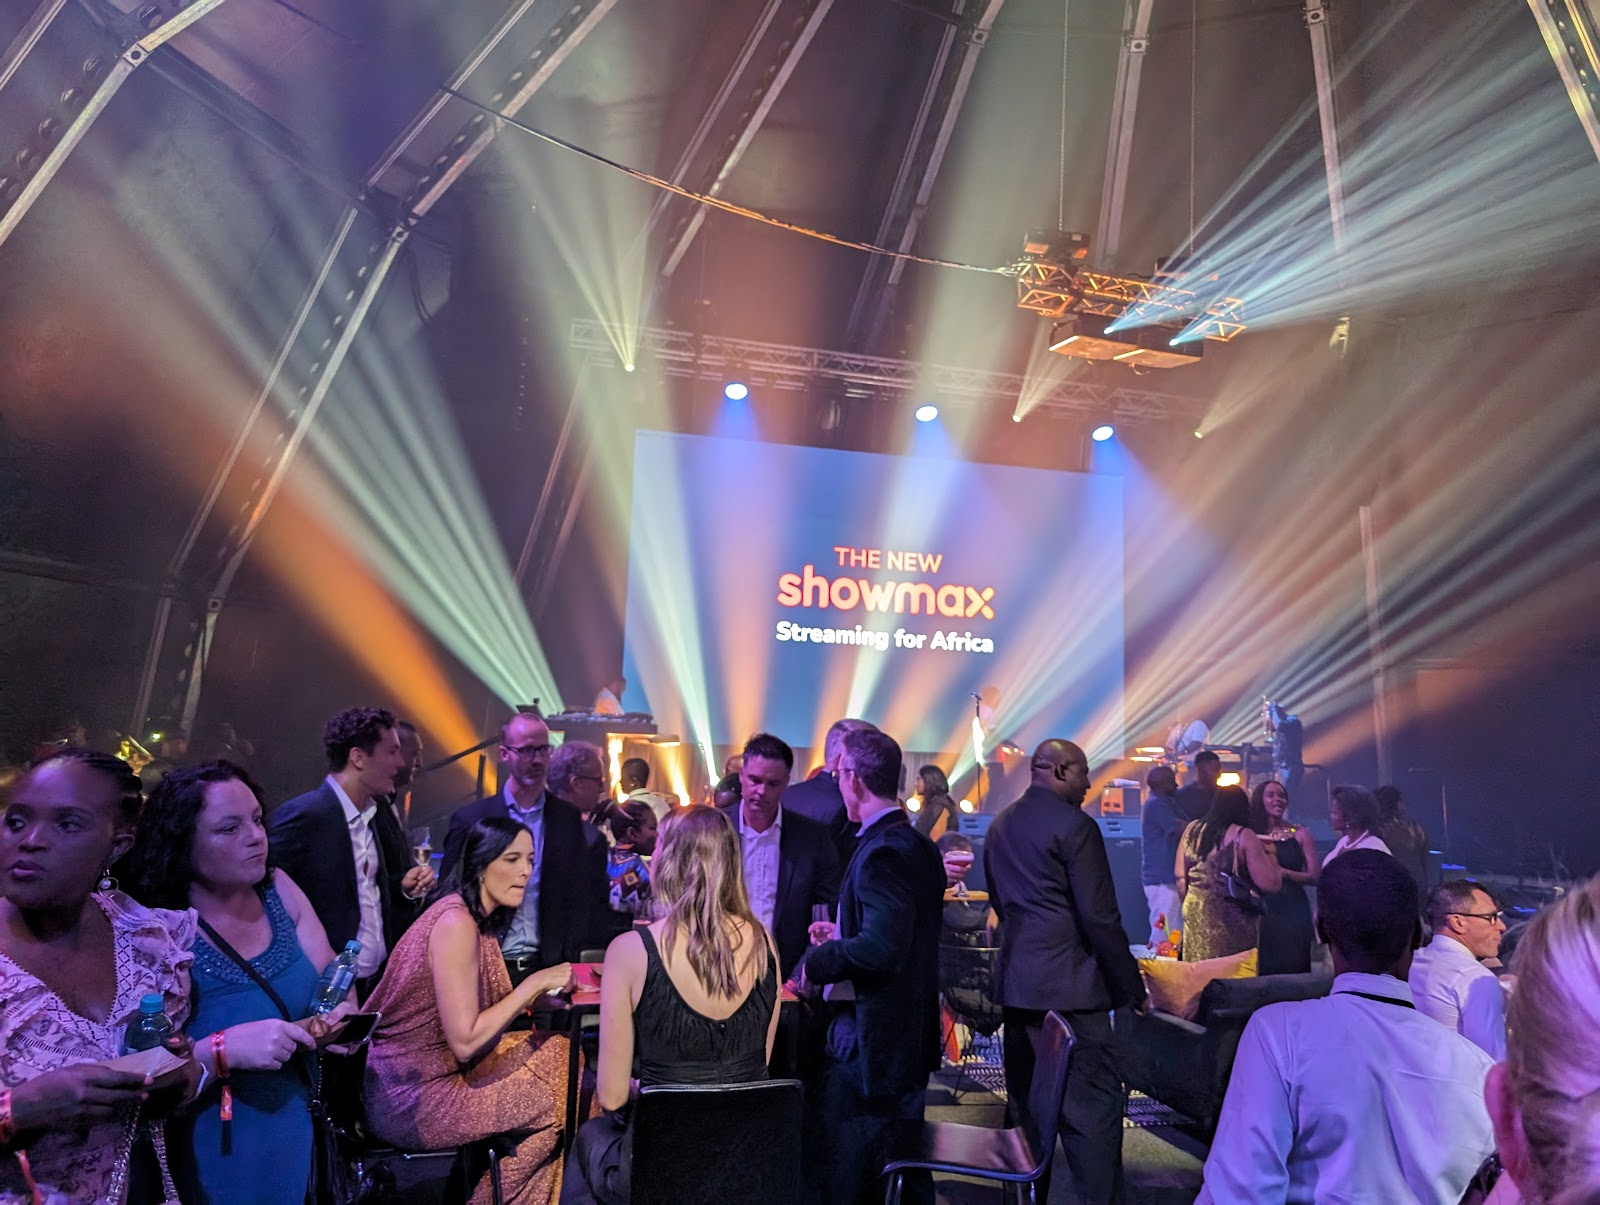 The grand launch of the revamped Showmax